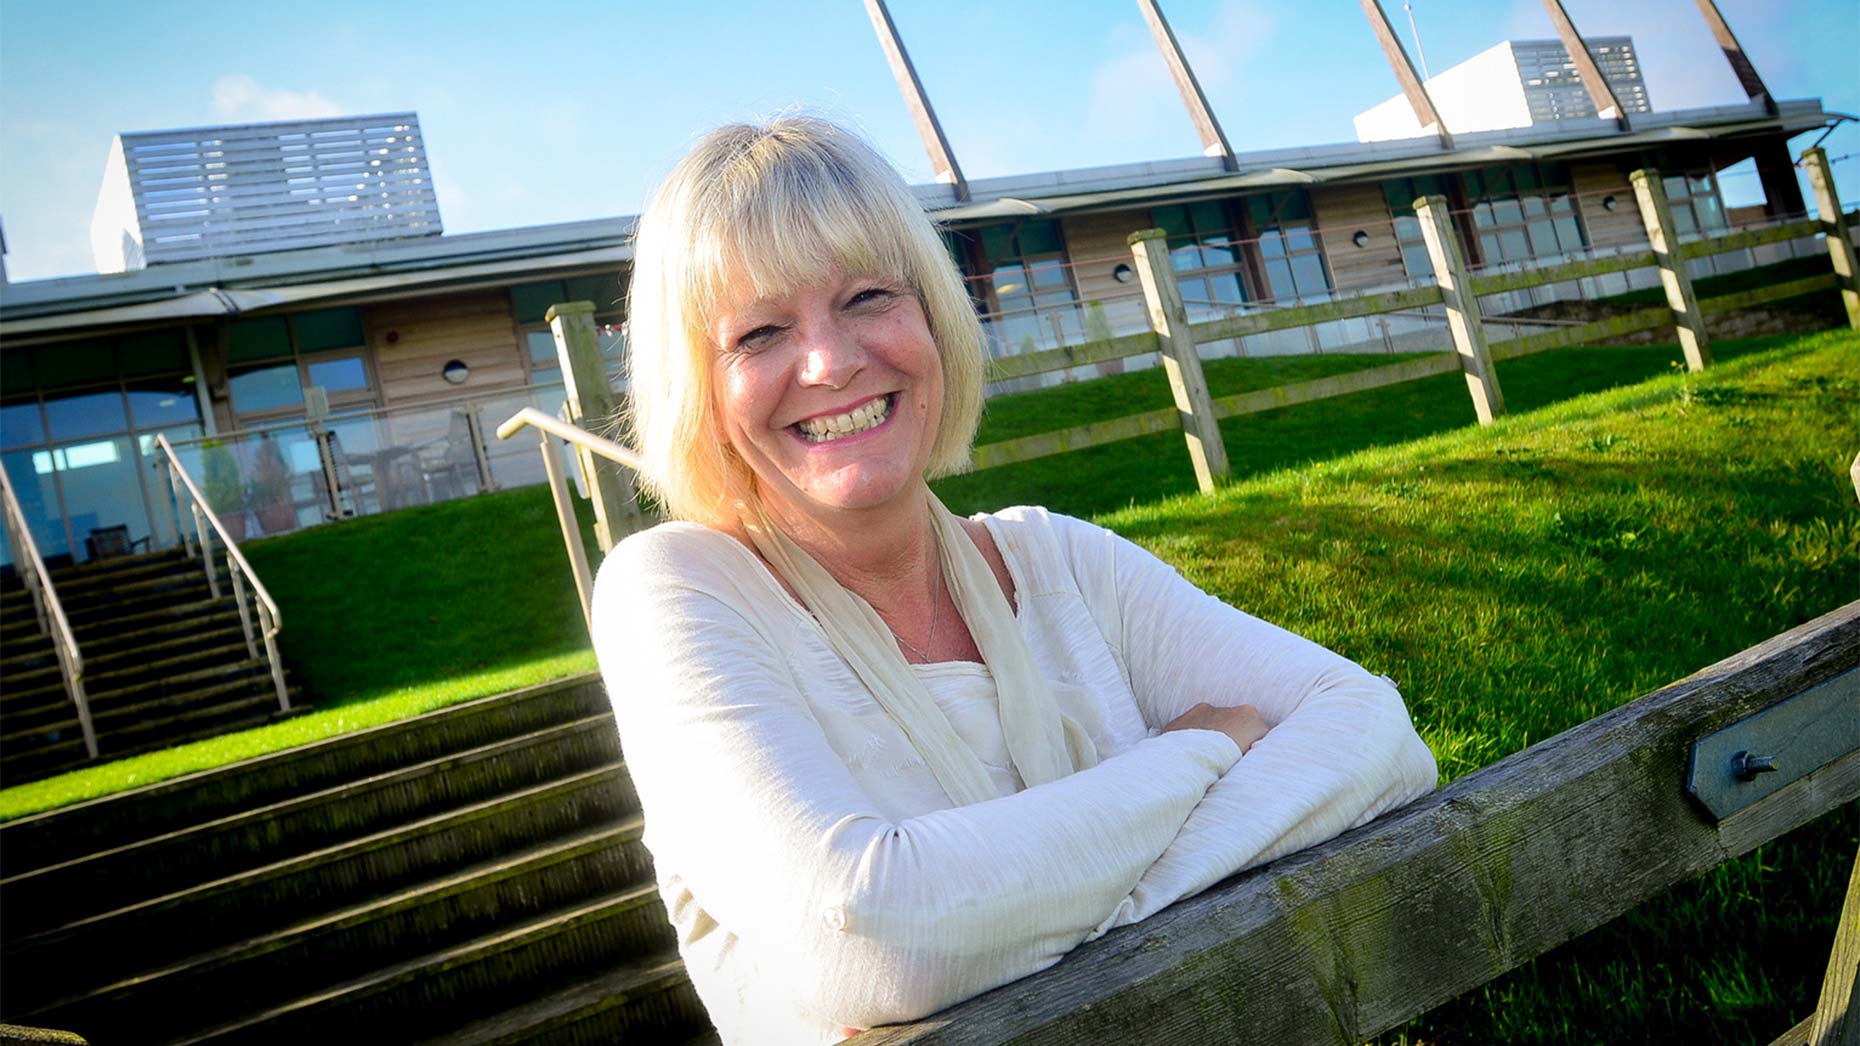 Jayne Southall, CEO of the Lincolnshire Showground and Lincolnshire Agricultural Society. Photo: Steve Smailes for Lincolnshire Business